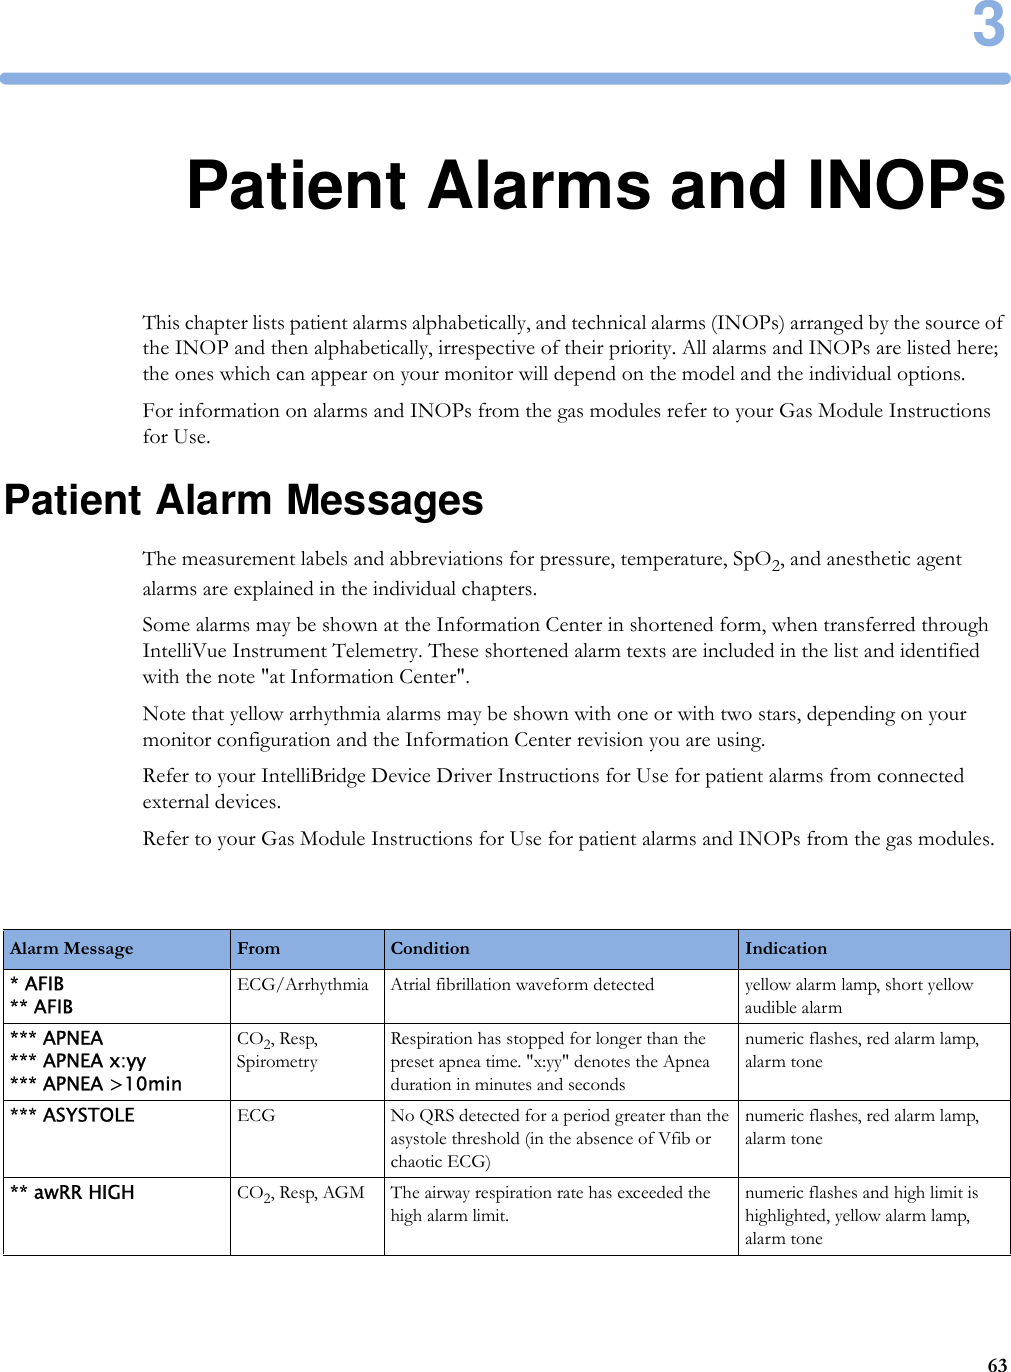 3633Patient Alarms and INOPsThis chapter lists patient alarms alphabetically, and technical alarms (INOPs) arranged by the source of the INOP and then alphabetically, irrespective of their priority. All alarms and INOPs are listed here; the ones which can appear on your monitor will depend on the model and the individual options.For information on alarms and INOPs from the gas modules refer to your Gas Module Instructions for Use.Patient Alarm MessagesThe measurement labels and abbreviations for pressure, temperature, SpO2, and anesthetic agent alarms are explained in the individual chapters. Some alarms may be shown at the Information Center in shortened form, when transferred through IntelliVue Instrument Telemetry. These shortened alarm texts are included in the list and identified with the note &quot;at Information Center&quot;.Note that yellow arrhythmia alarms may be shown with one or with two stars, depending on your monitor configuration and the Information Center revision you are using.Refer to your IntelliBridge Device Driver Instructions for Use for patient alarms from connected external devices.Refer to your Gas Module Instructions for Use for patient alarms and INOPs from the gas modules.Alarm Message From Condition Indication* AFIB** AFIBECG/Arrhythmia Atrial fibrillation waveform detected yellow alarm lamp, short yellow audible alarm*** APNEA*** APNEA x:yy*** APNEA &gt;10minCO2, Resp, SpirometryRespiration has stopped for longer than the preset apnea time. &quot;x:yy&quot; denotes the Apnea duration in minutes and secondsnumeric flashes, red alarm lamp, alarm tone*** ASYSTOLE ECG No QRS detected for a period greater than the asystole threshold (in the absence of Vfib or chaotic ECG)numeric flashes, red alarm lamp, alarm tone** awRR HIGH CO2, Resp, AGM The airway respiration rate has exceeded the high alarm limit.numeric flashes and high limit is highlighted, yellow alarm lamp, alarm tone